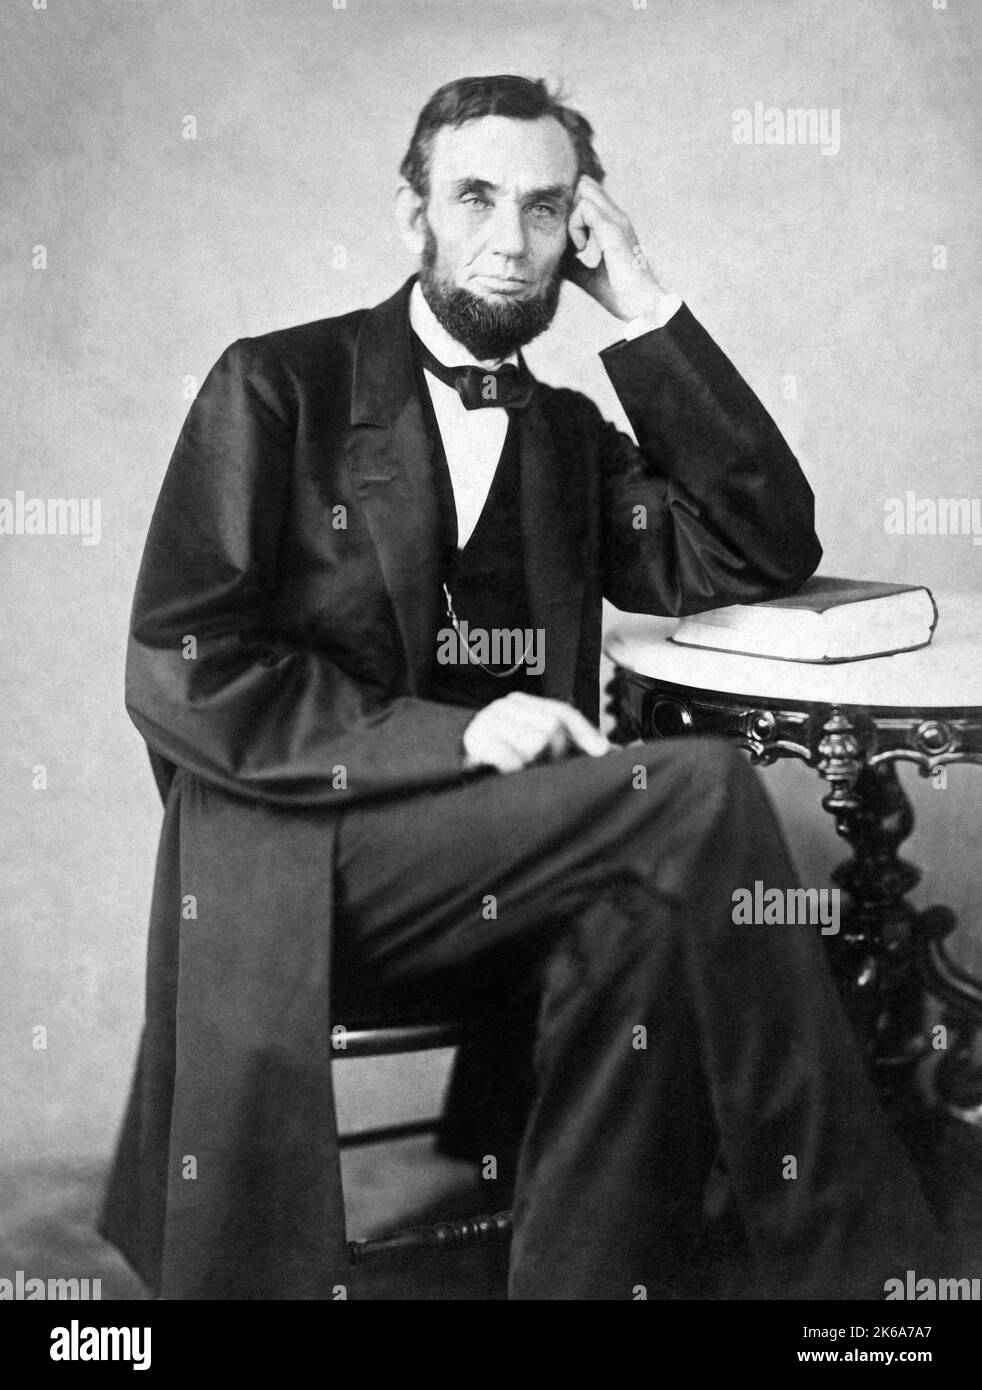 Abraham Lincoln, the 16th US President, leaning against a book while sitting at a table. Stock Photo